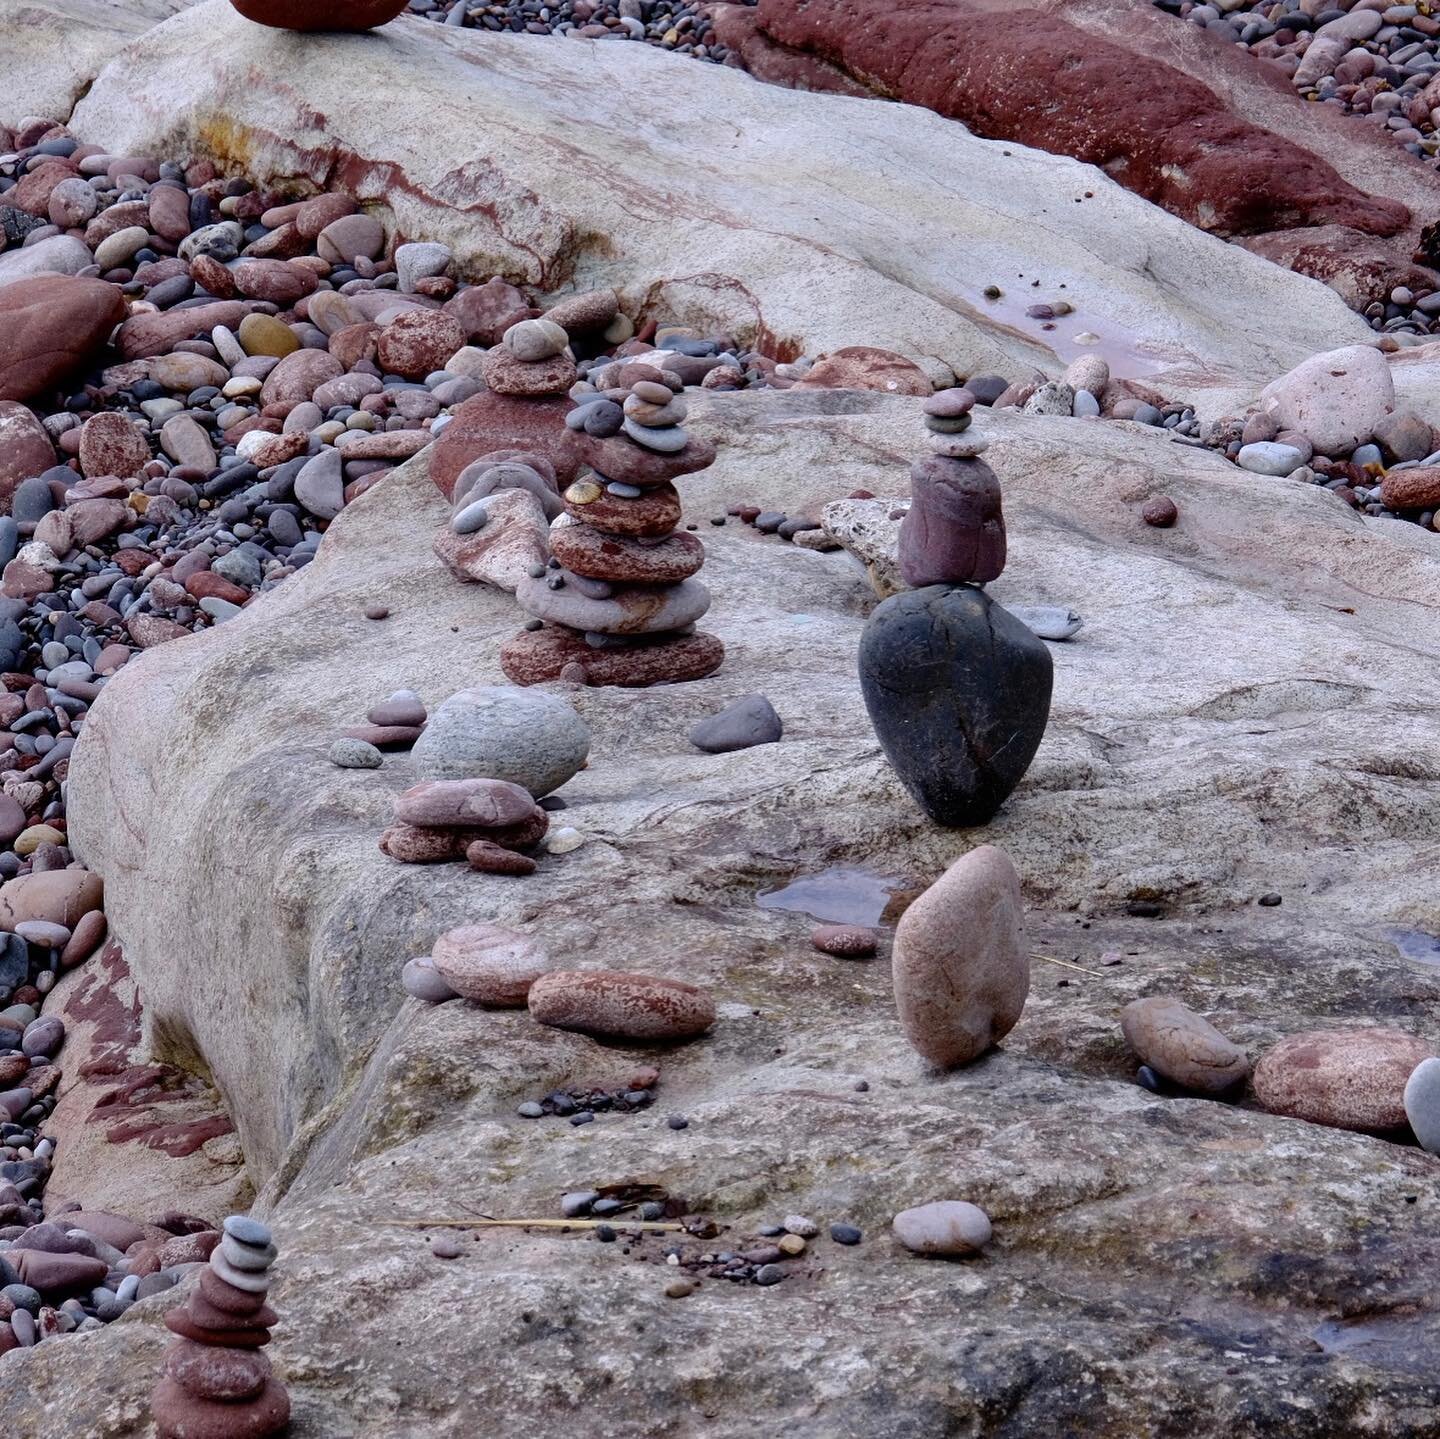 Really enjoyed visiting the European Stone Stacking Championship here in Dunbar today. How *do* they do it?
.
.
.
@europeanstonestacking #stonestacking #dunbar #scotland #belhavenbay #curlewcabin #visitscotland #lovescotland #eastcoastscotland #visit